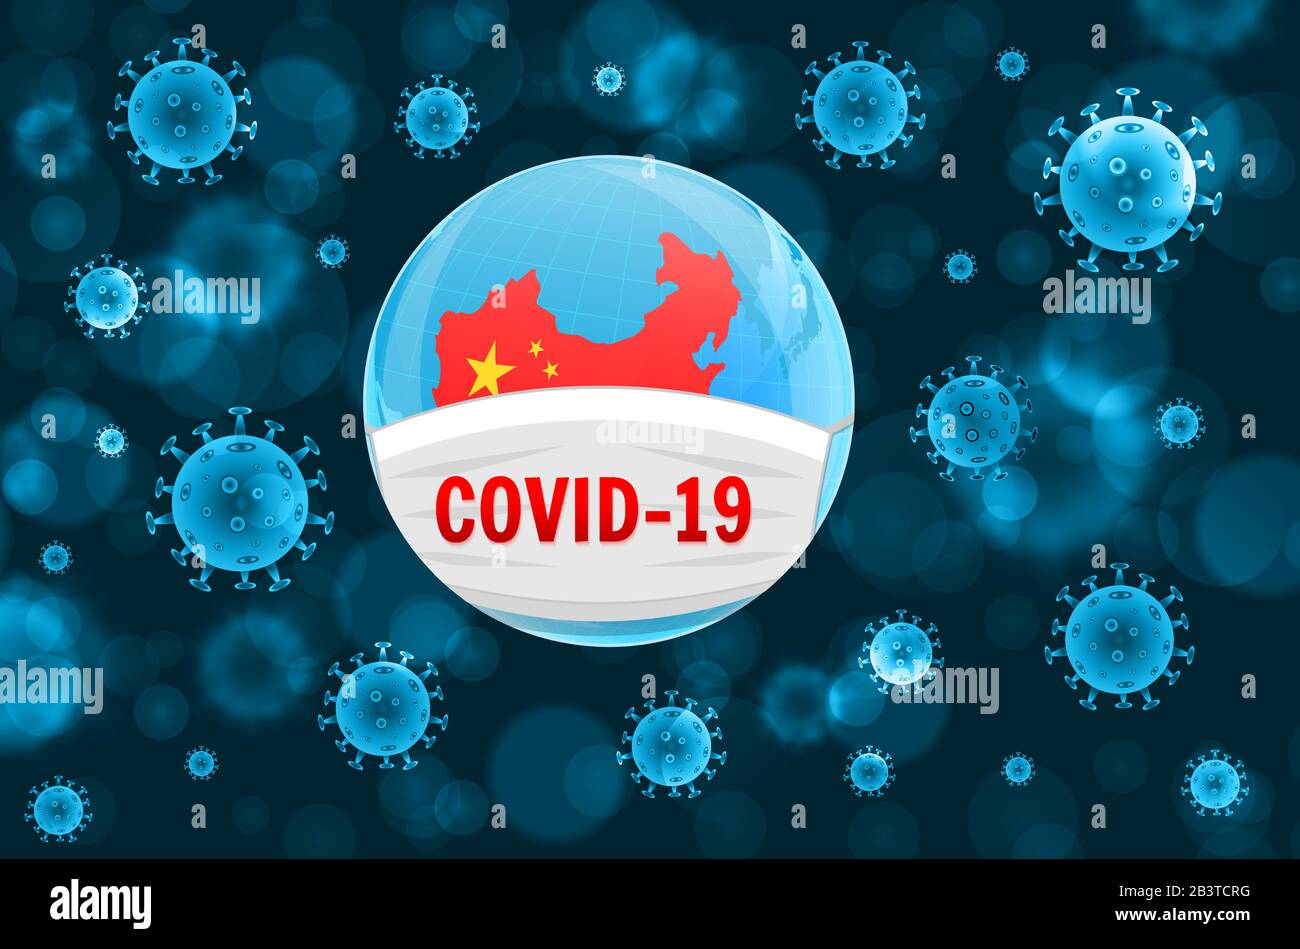 Coronavirus COVID-19 concept. Earth in a medical mask. Dangerous chinese nCoV coronavirus outbreak. Pandemic medical concept with dangerous cells. Vec Stock Vector